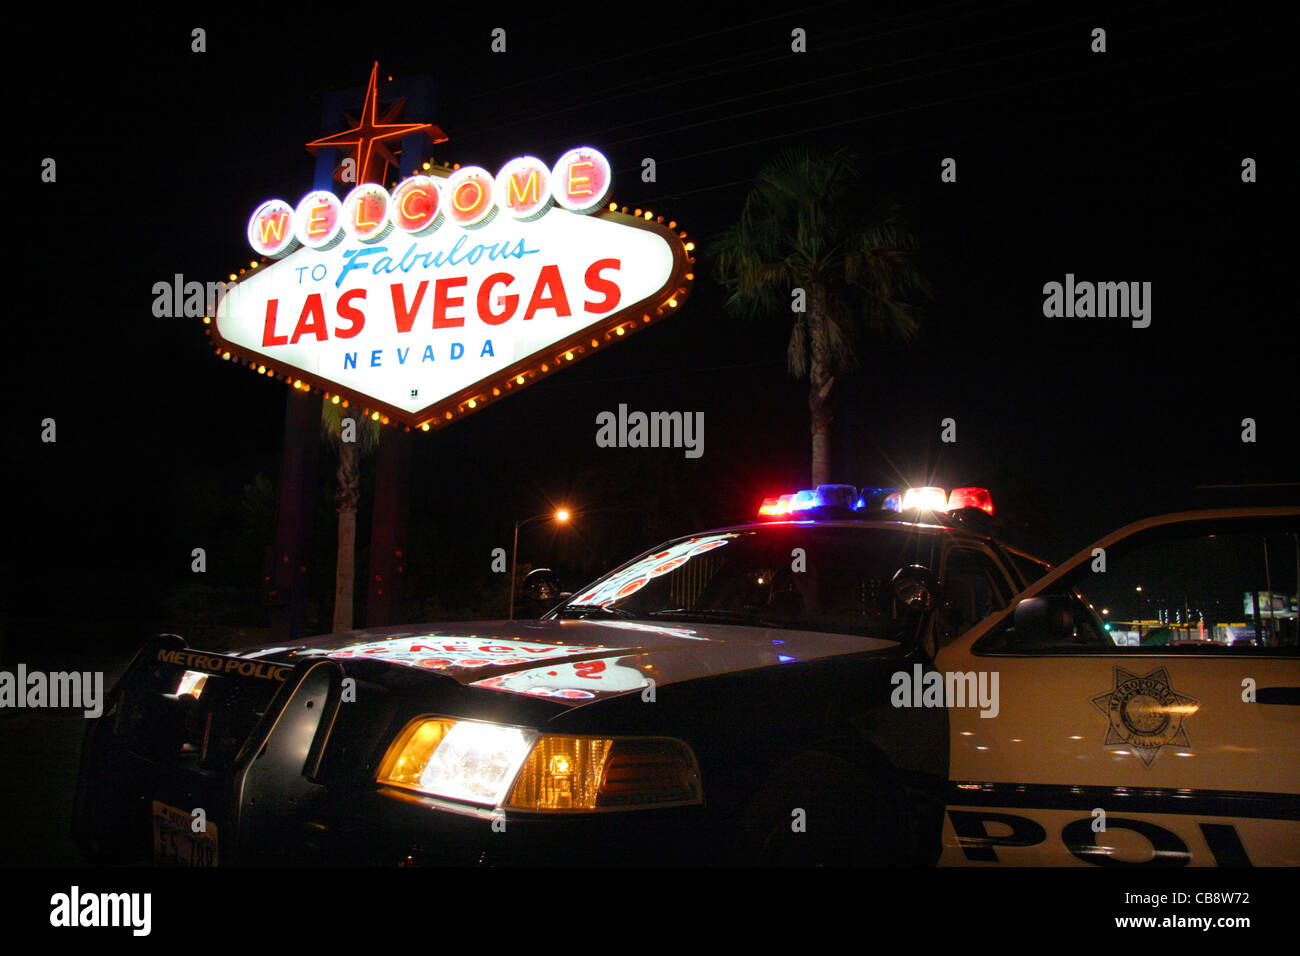 Las Vegas Police car by the famous Welcome to Las Vegas sign. Stock Photo